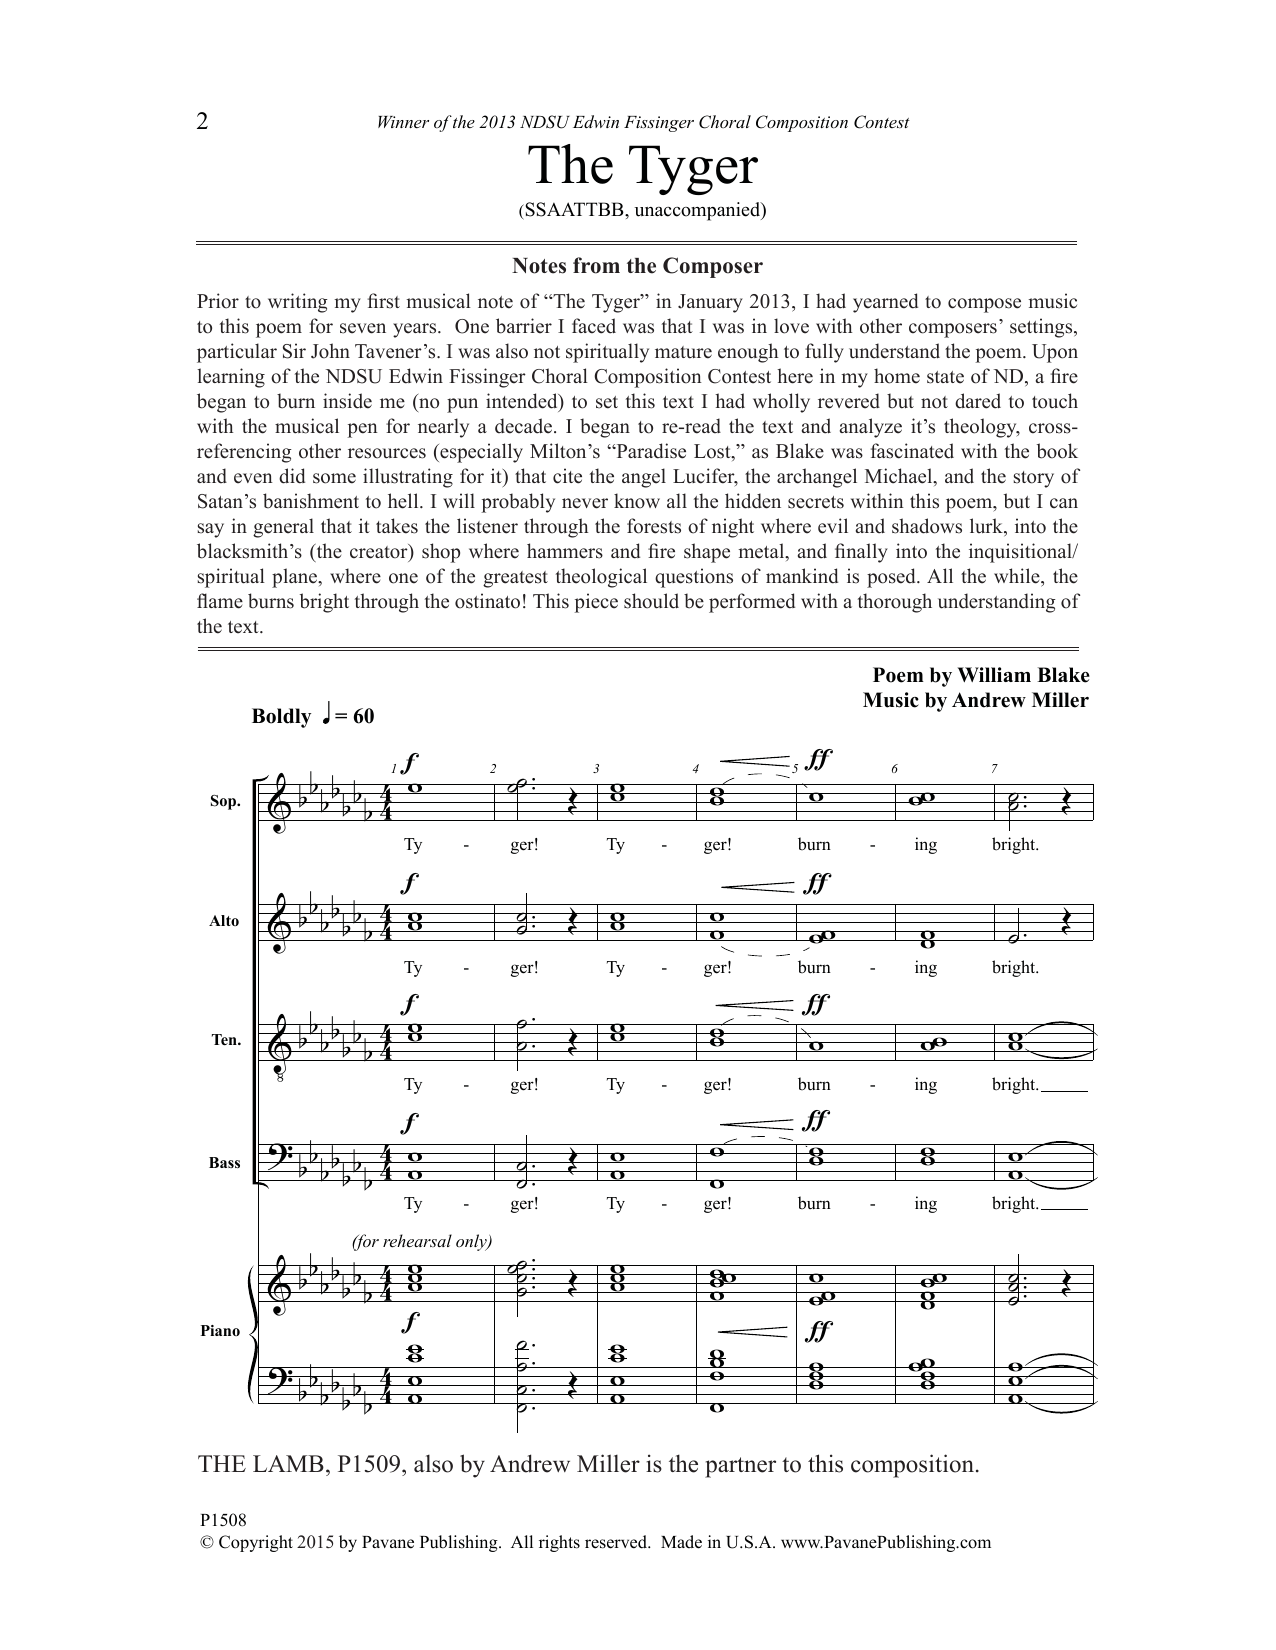 Andrew Miller The Tyger sheet music notes and chords. Download Printable PDF.